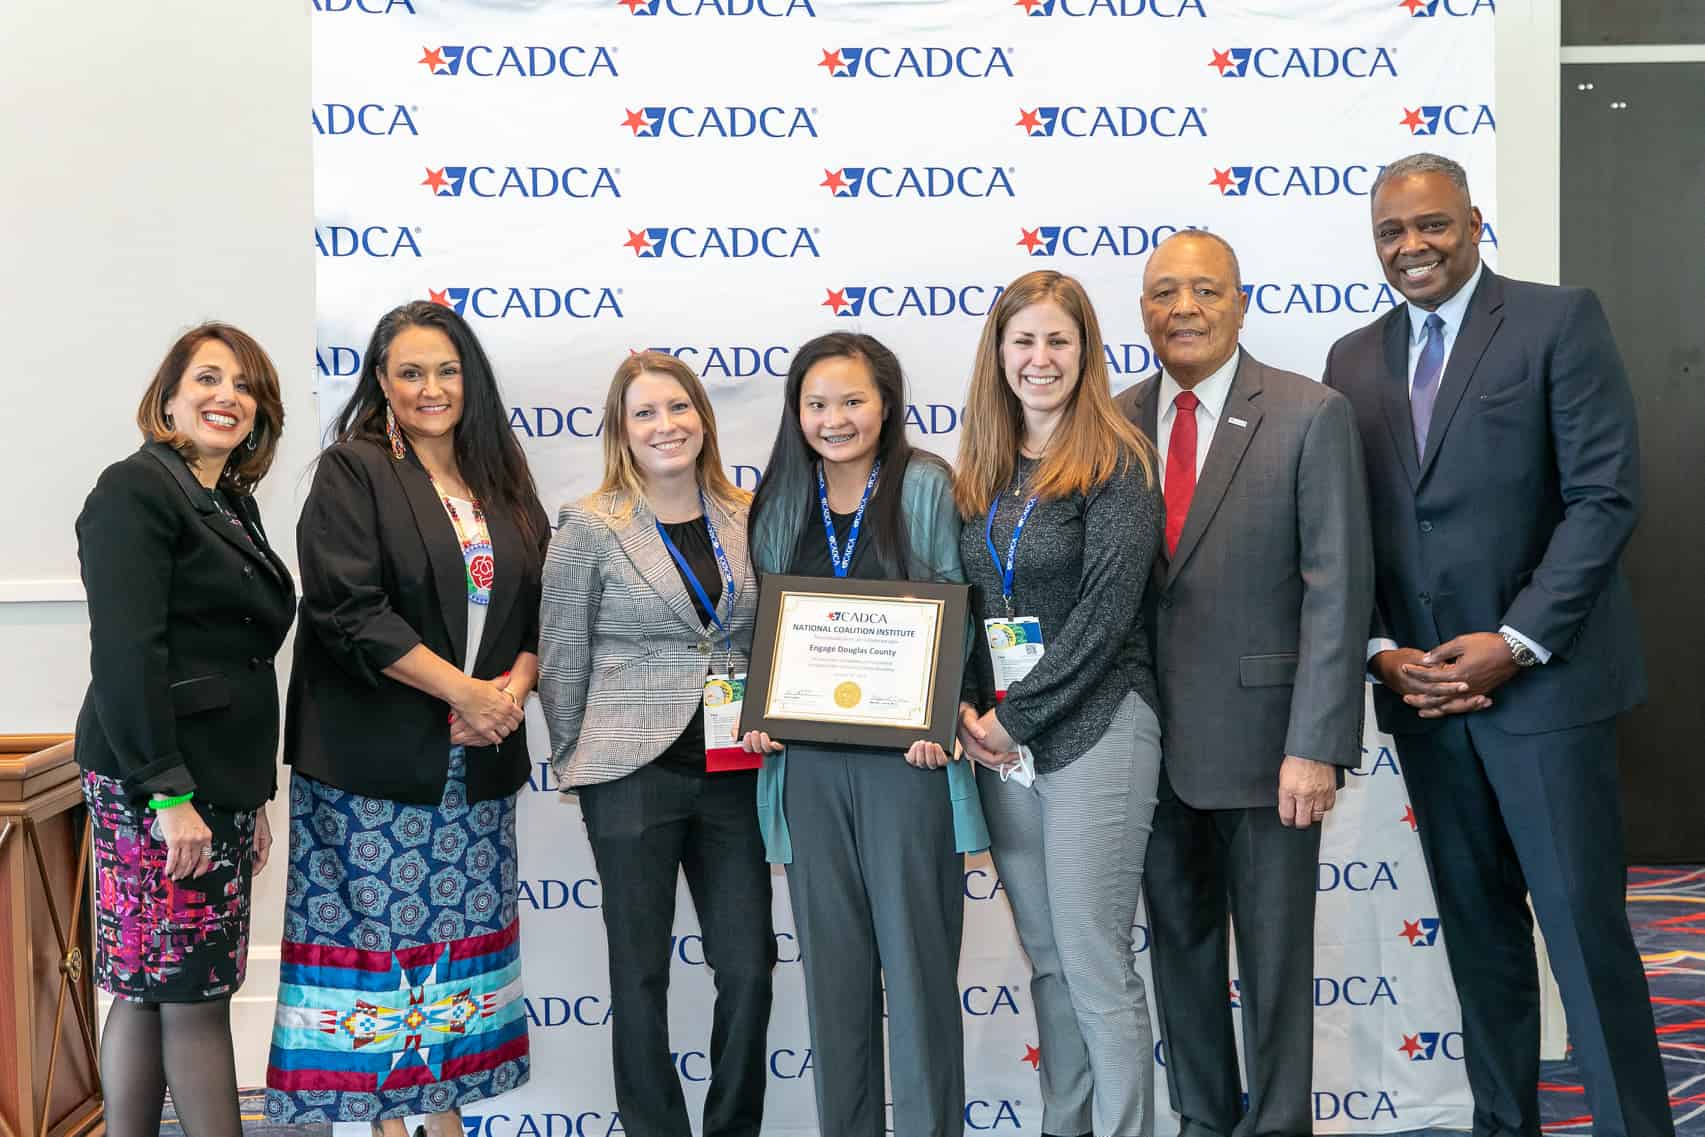 Engage Douglas County honored at CADCA's National Leadership Forum